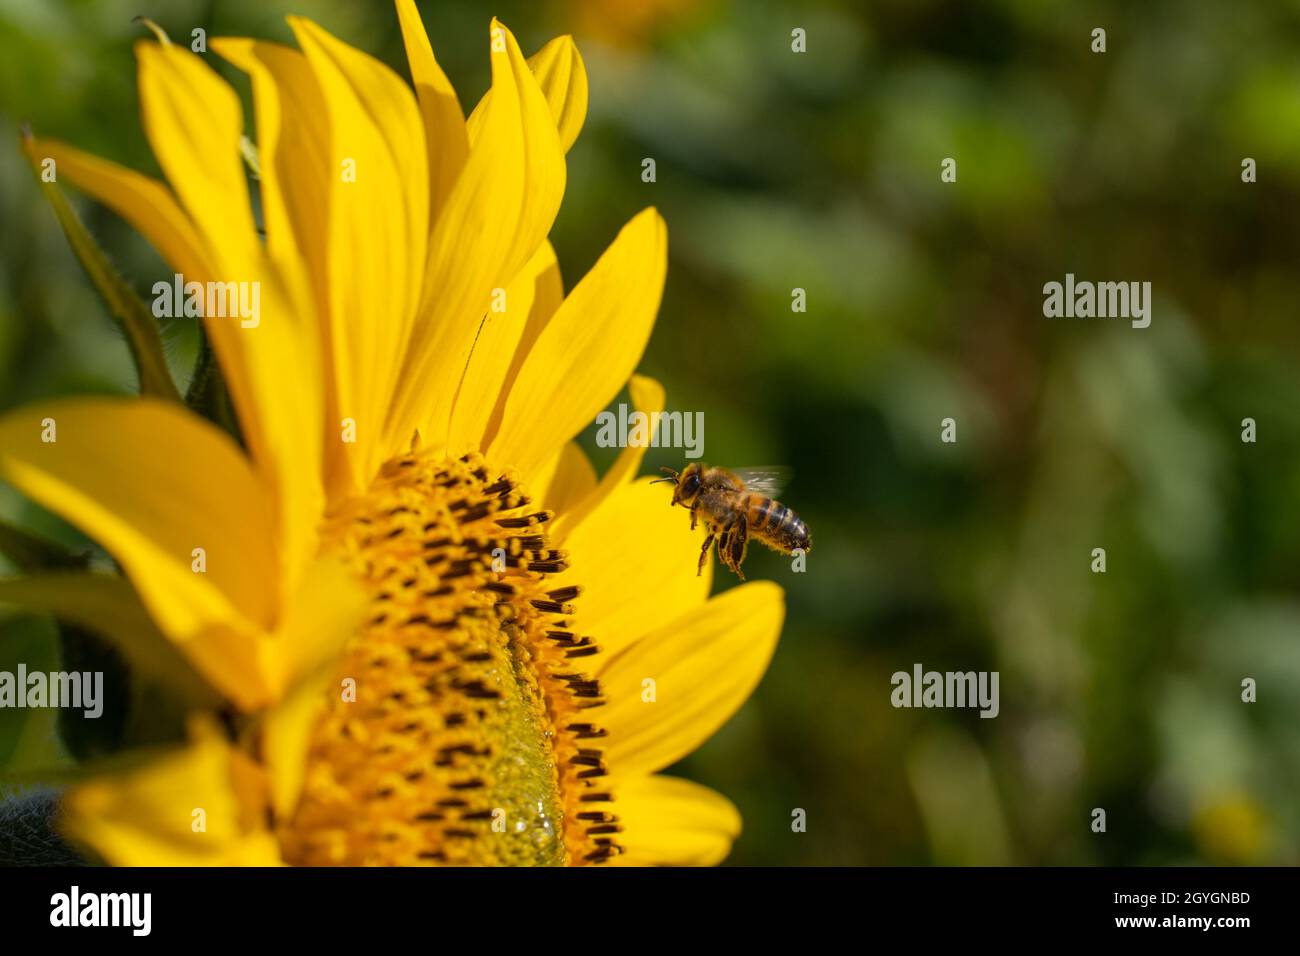 Bee approaching a sunflower on a bright summers day. Stock Photo